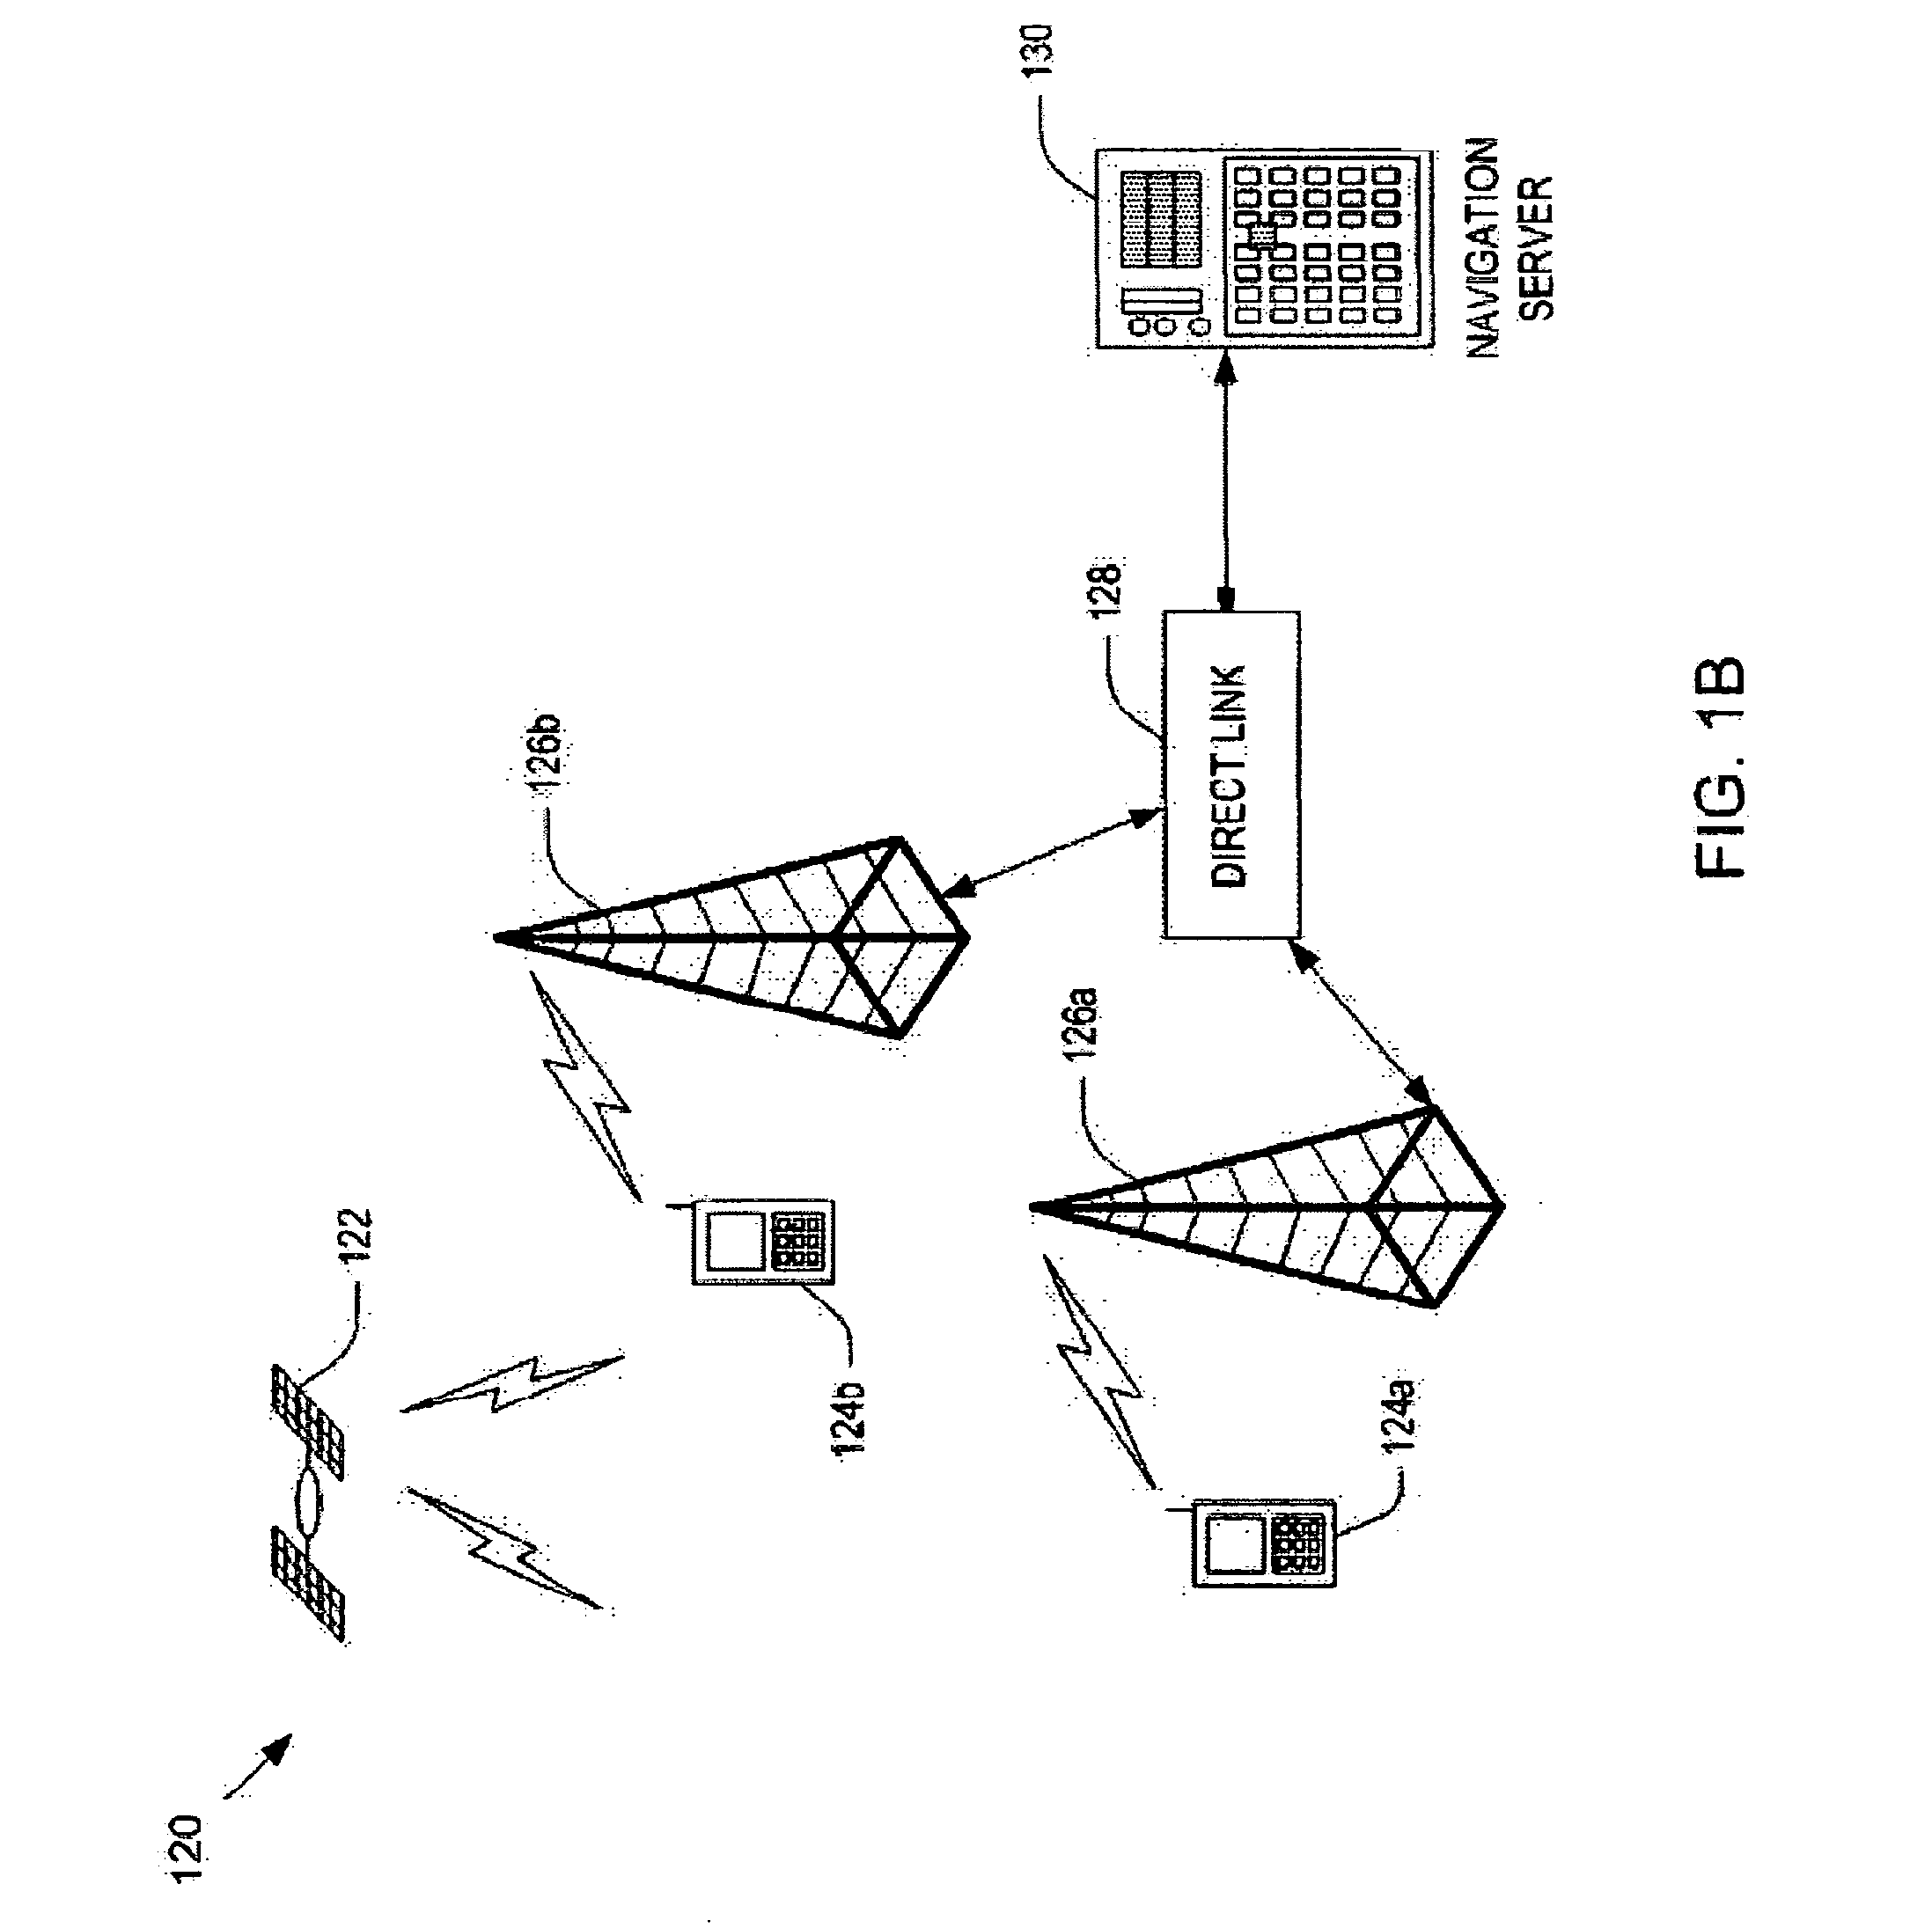 Method and system for multiple route navigation